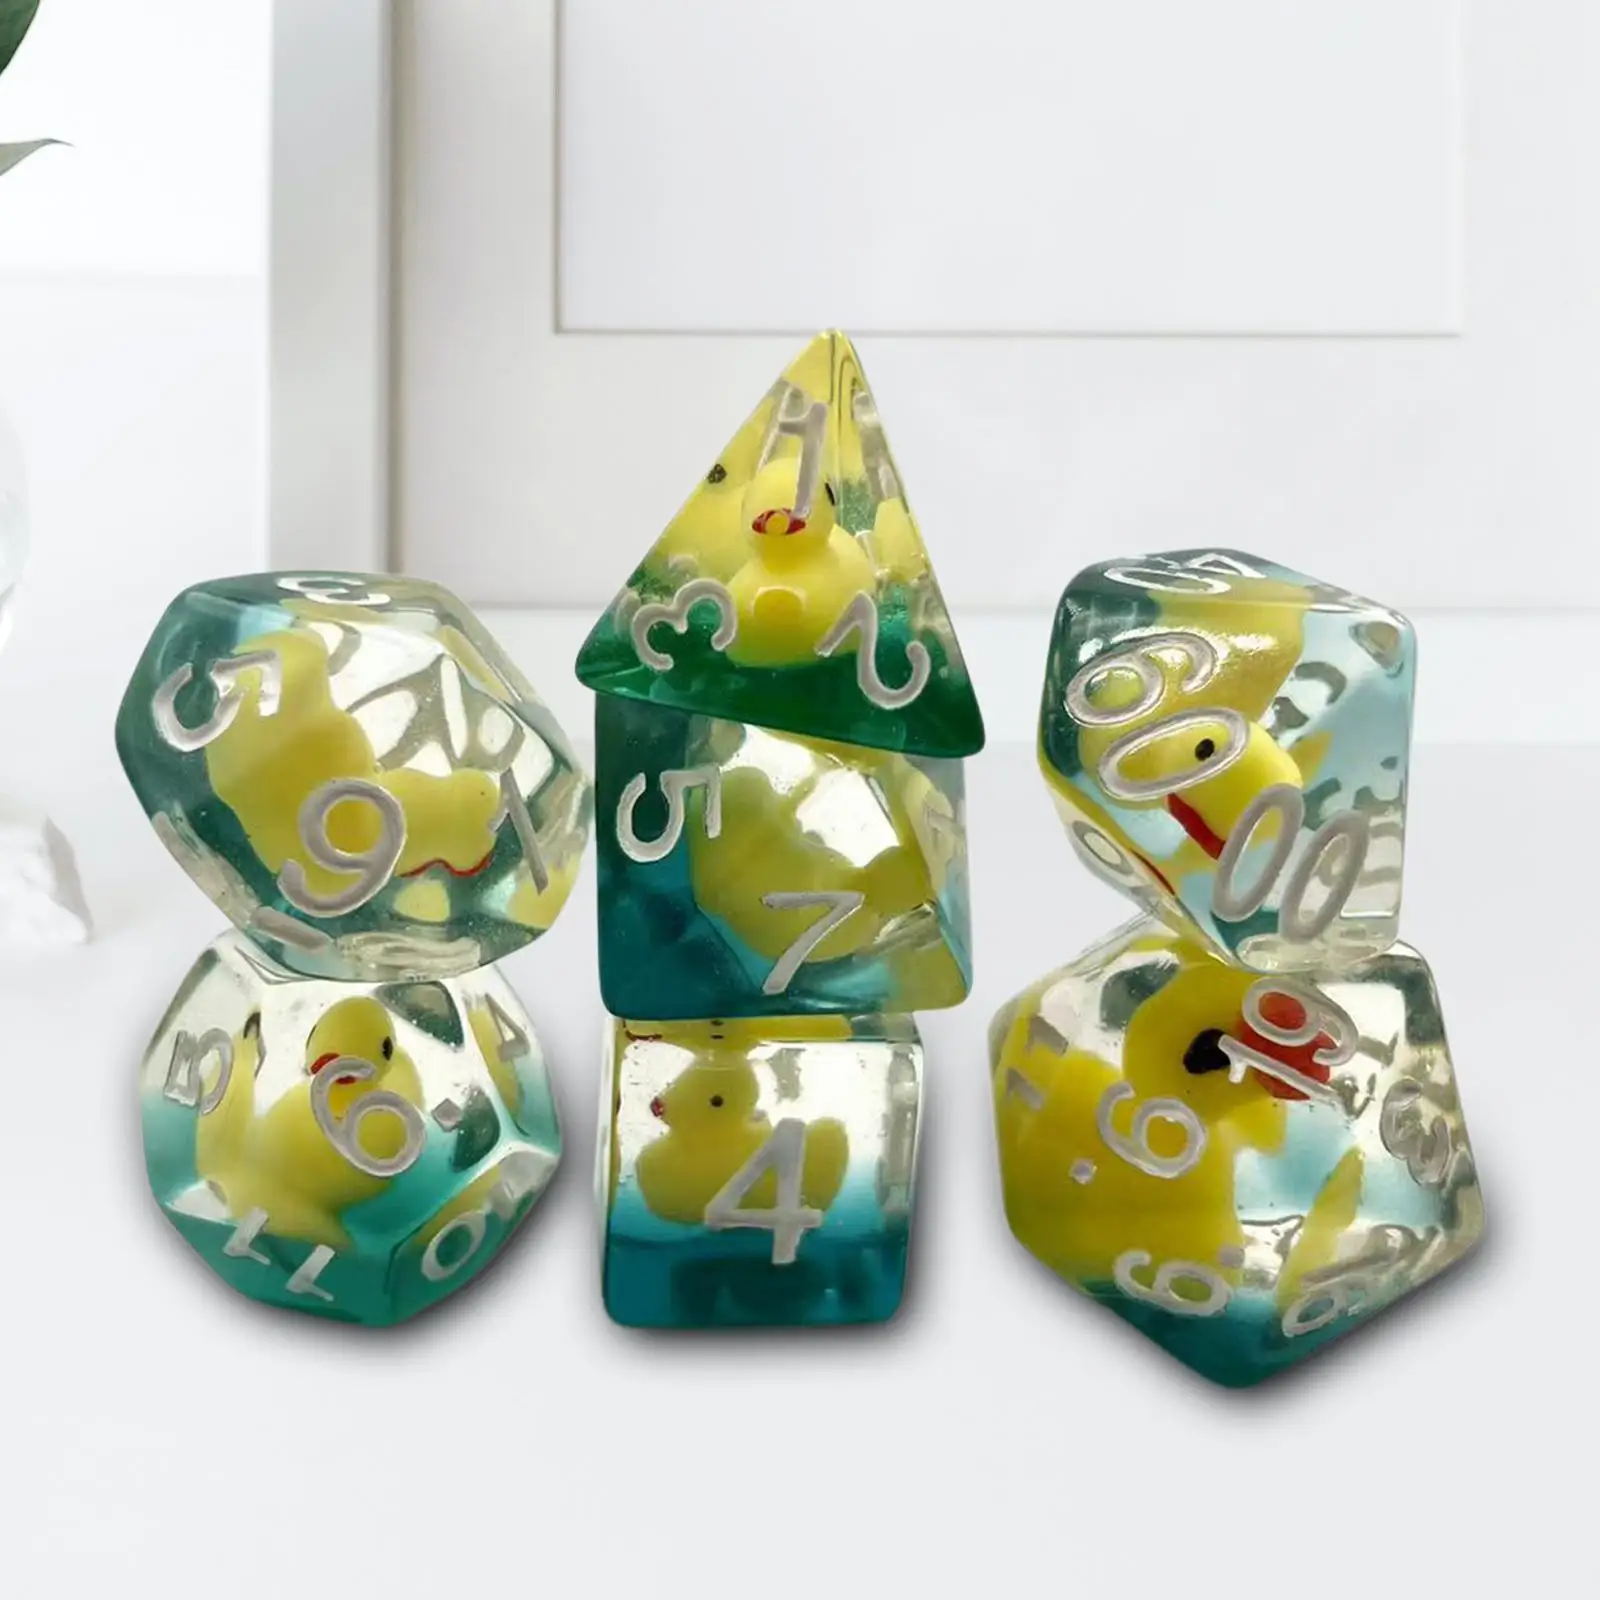 7Pcs Multi Sided Polyhedral Dices Set Filled with Ducks Animal Entertainment Toys for Card Games Role Playing RPG Table Games